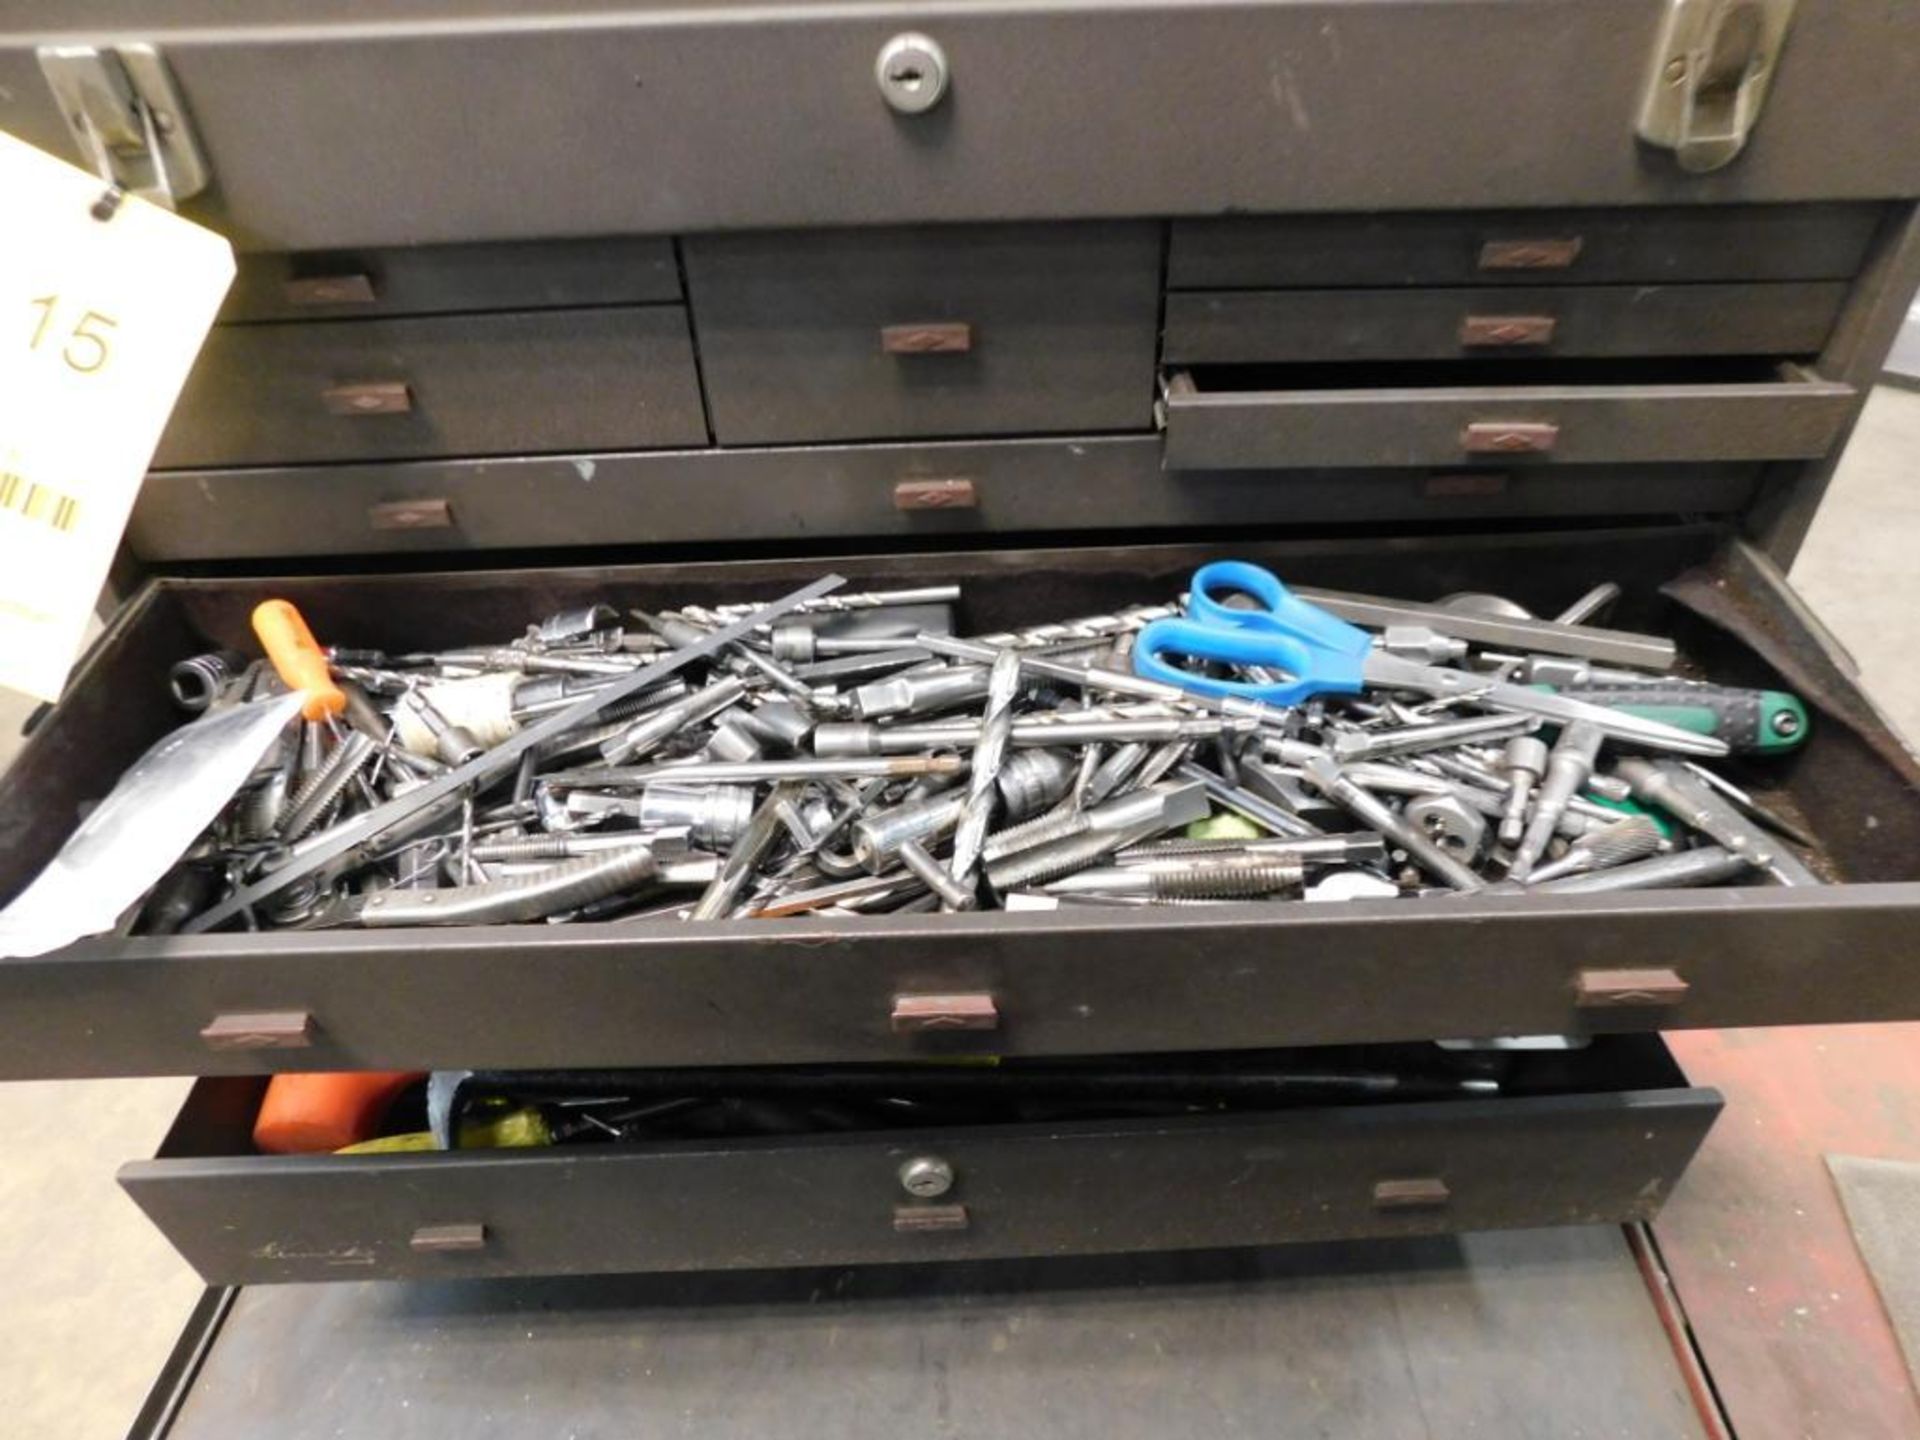 LOT: Portable 7-Drawer Tool Chest with Contents of Screw Drivers, Sockets, Wrenches, Hammers, - Image 4 of 5